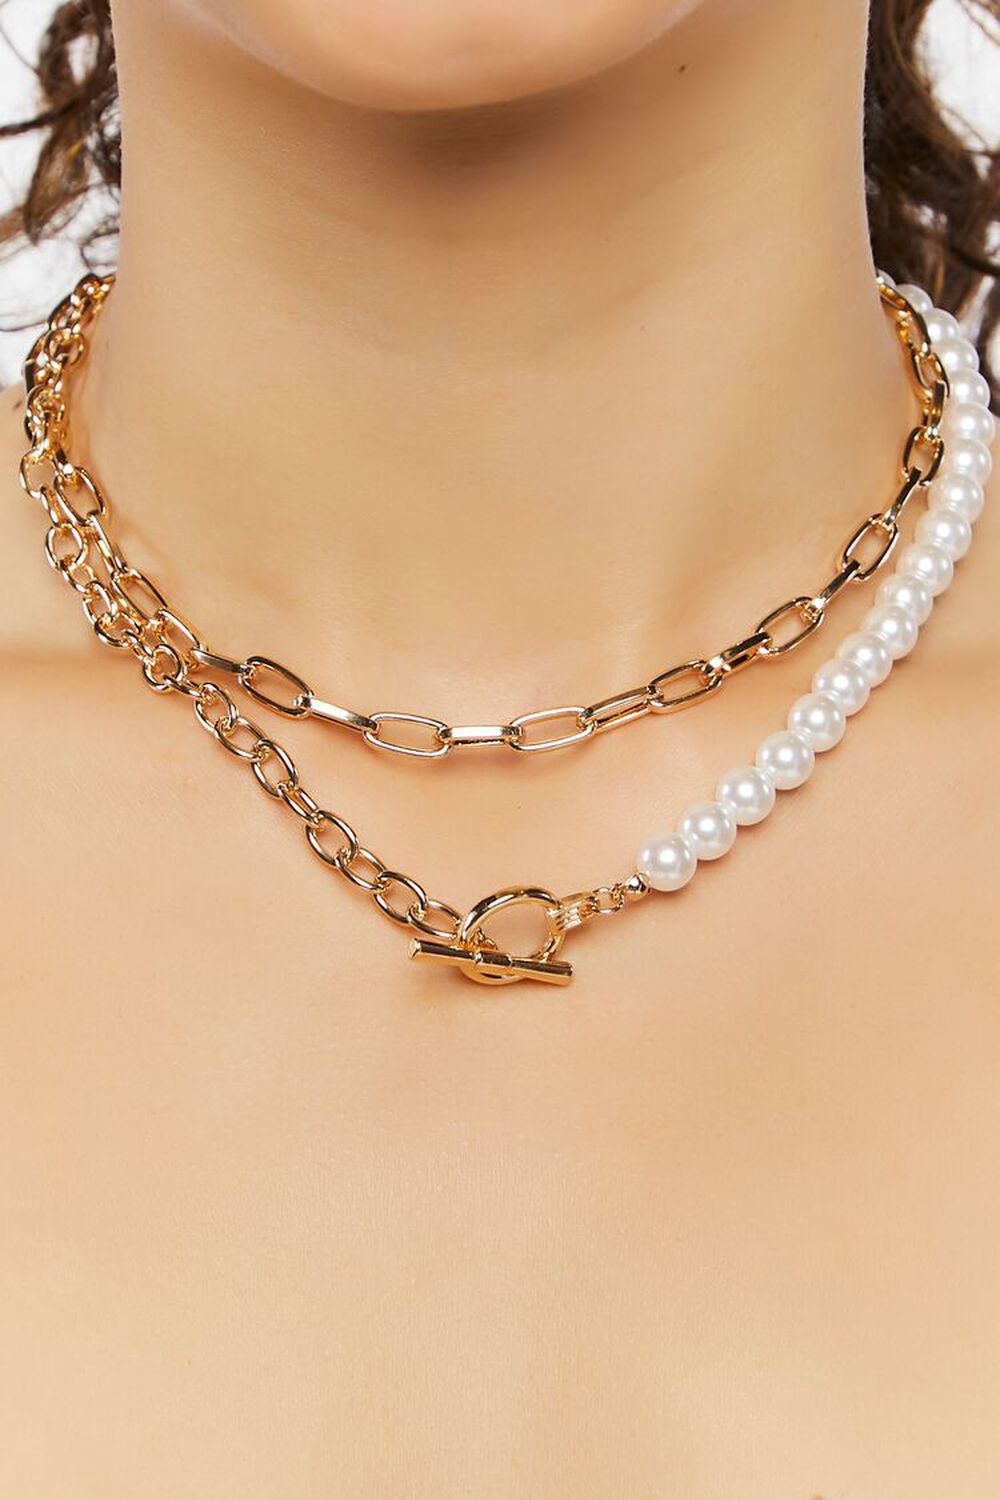 CREAM/GOLD Layered Faux Pearl Chain Necklace, image 1